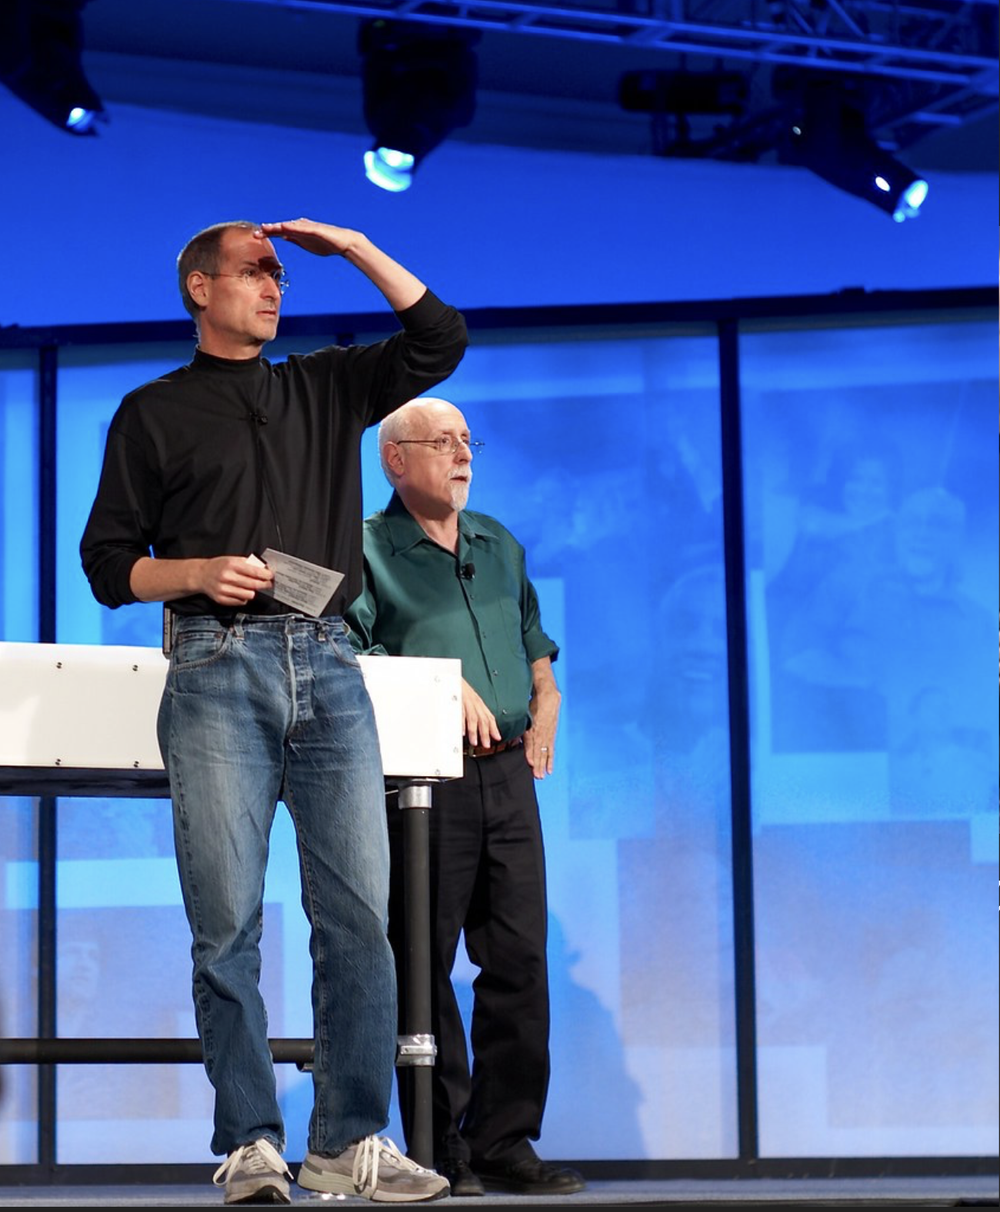   "Steve Jobs and Walt Mossberg"  by  Joi  is licensed under  CC BY 2.0  